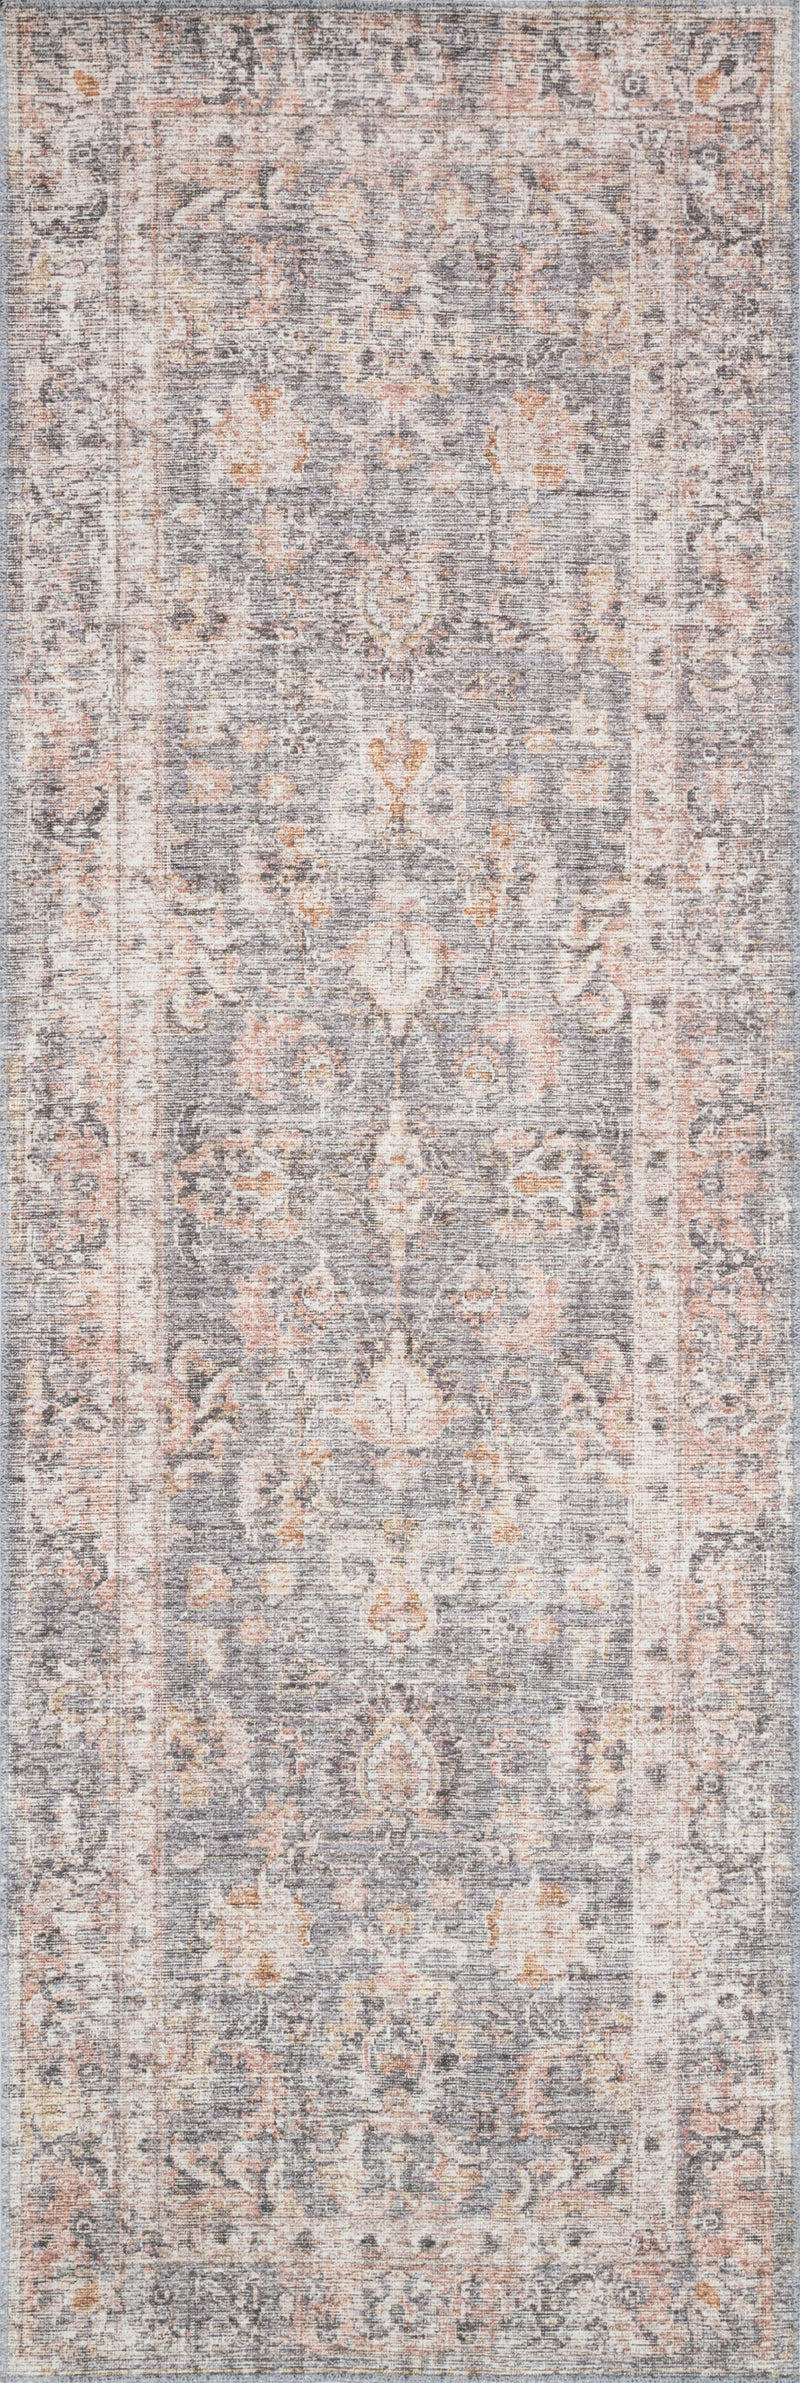 SKYE Collection Rug  in  GREY / APRICOT Gray Accent Power-Loomed Polyester